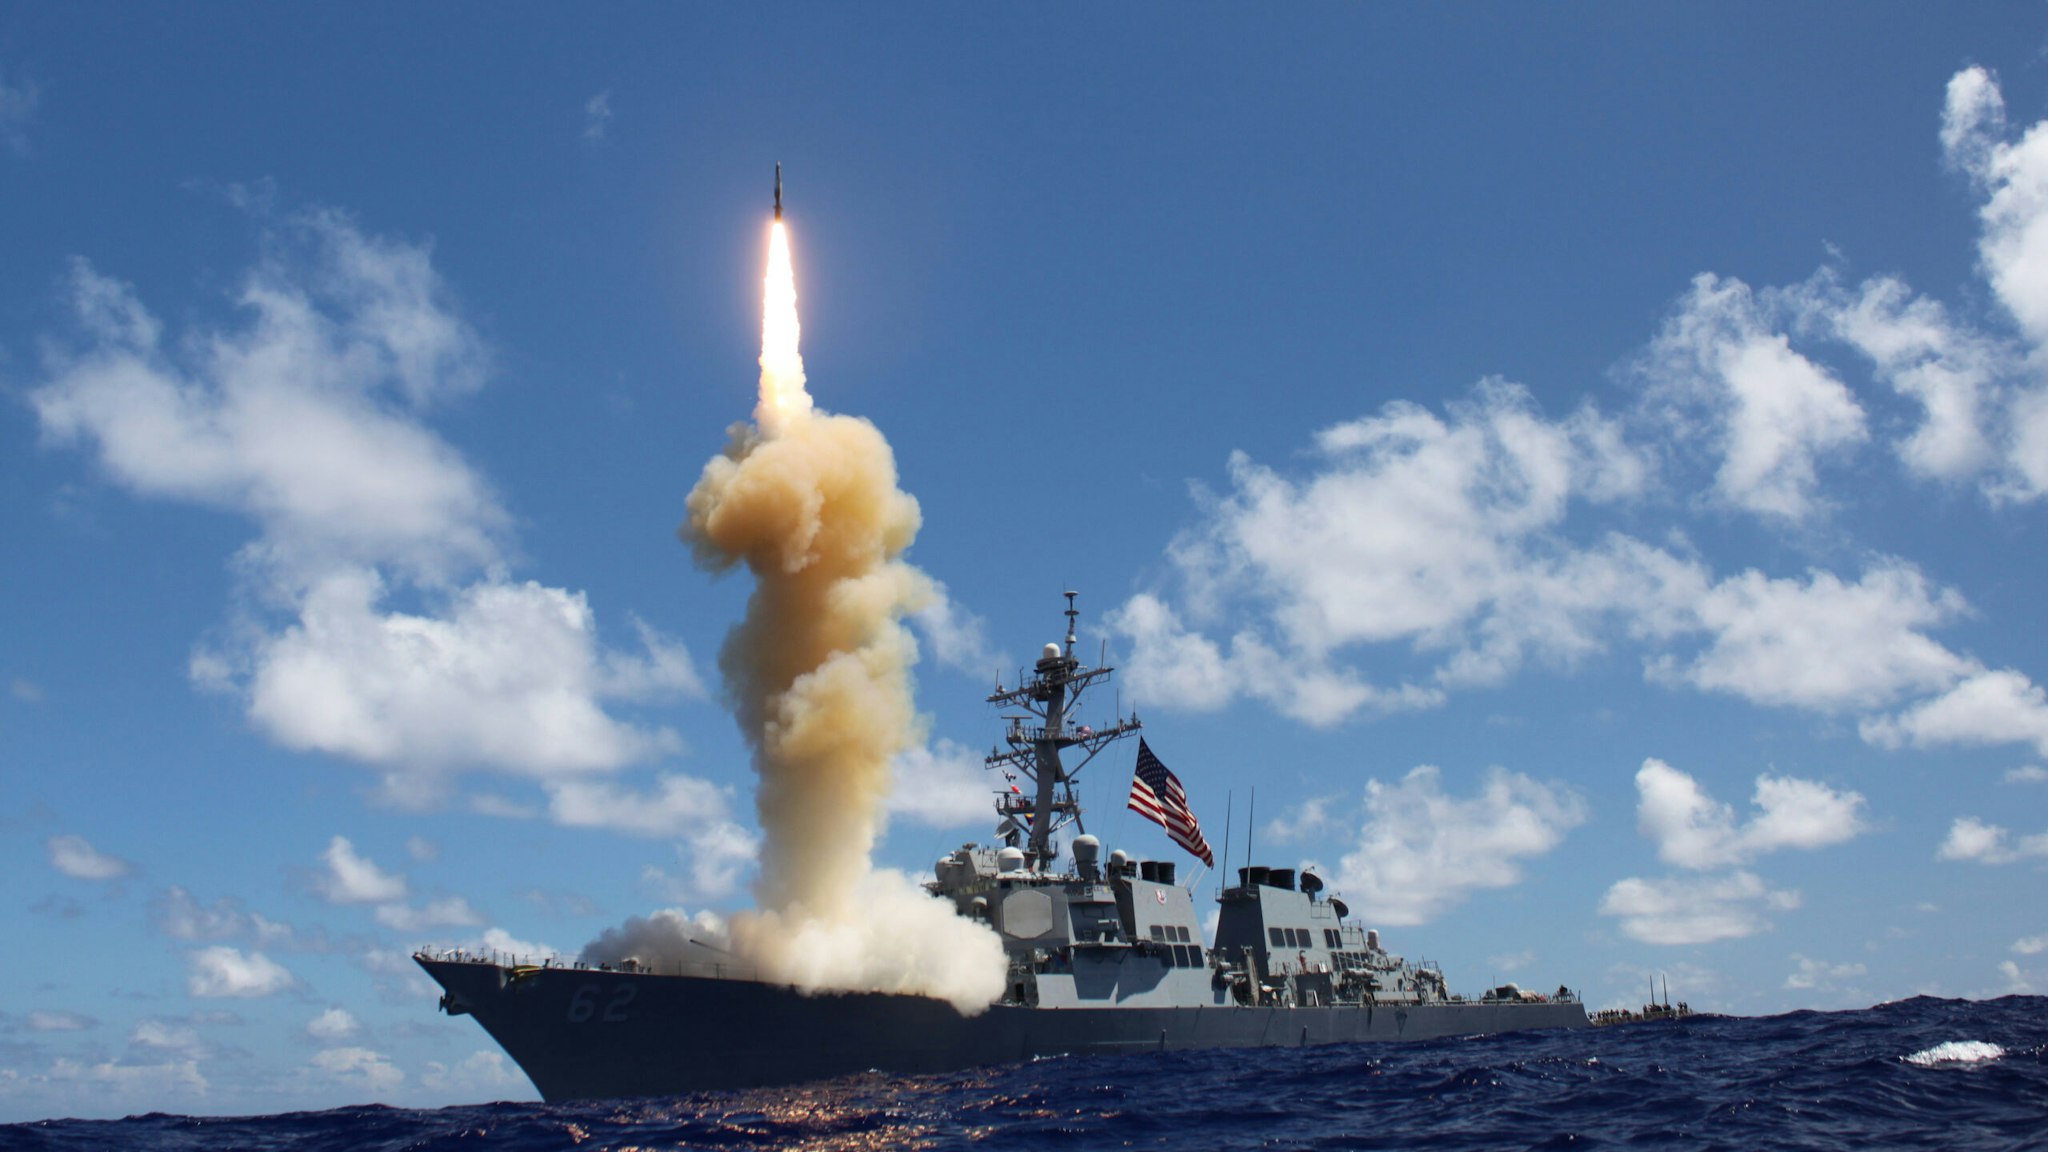 Guided-missile destroyer USS Fitzgerald (DDG 62) fires a Standard Missile-3 (SM-3) during a joint ballistic missile defense exercise, Pacific Ocean, 2012. Image courtesy US Navy.